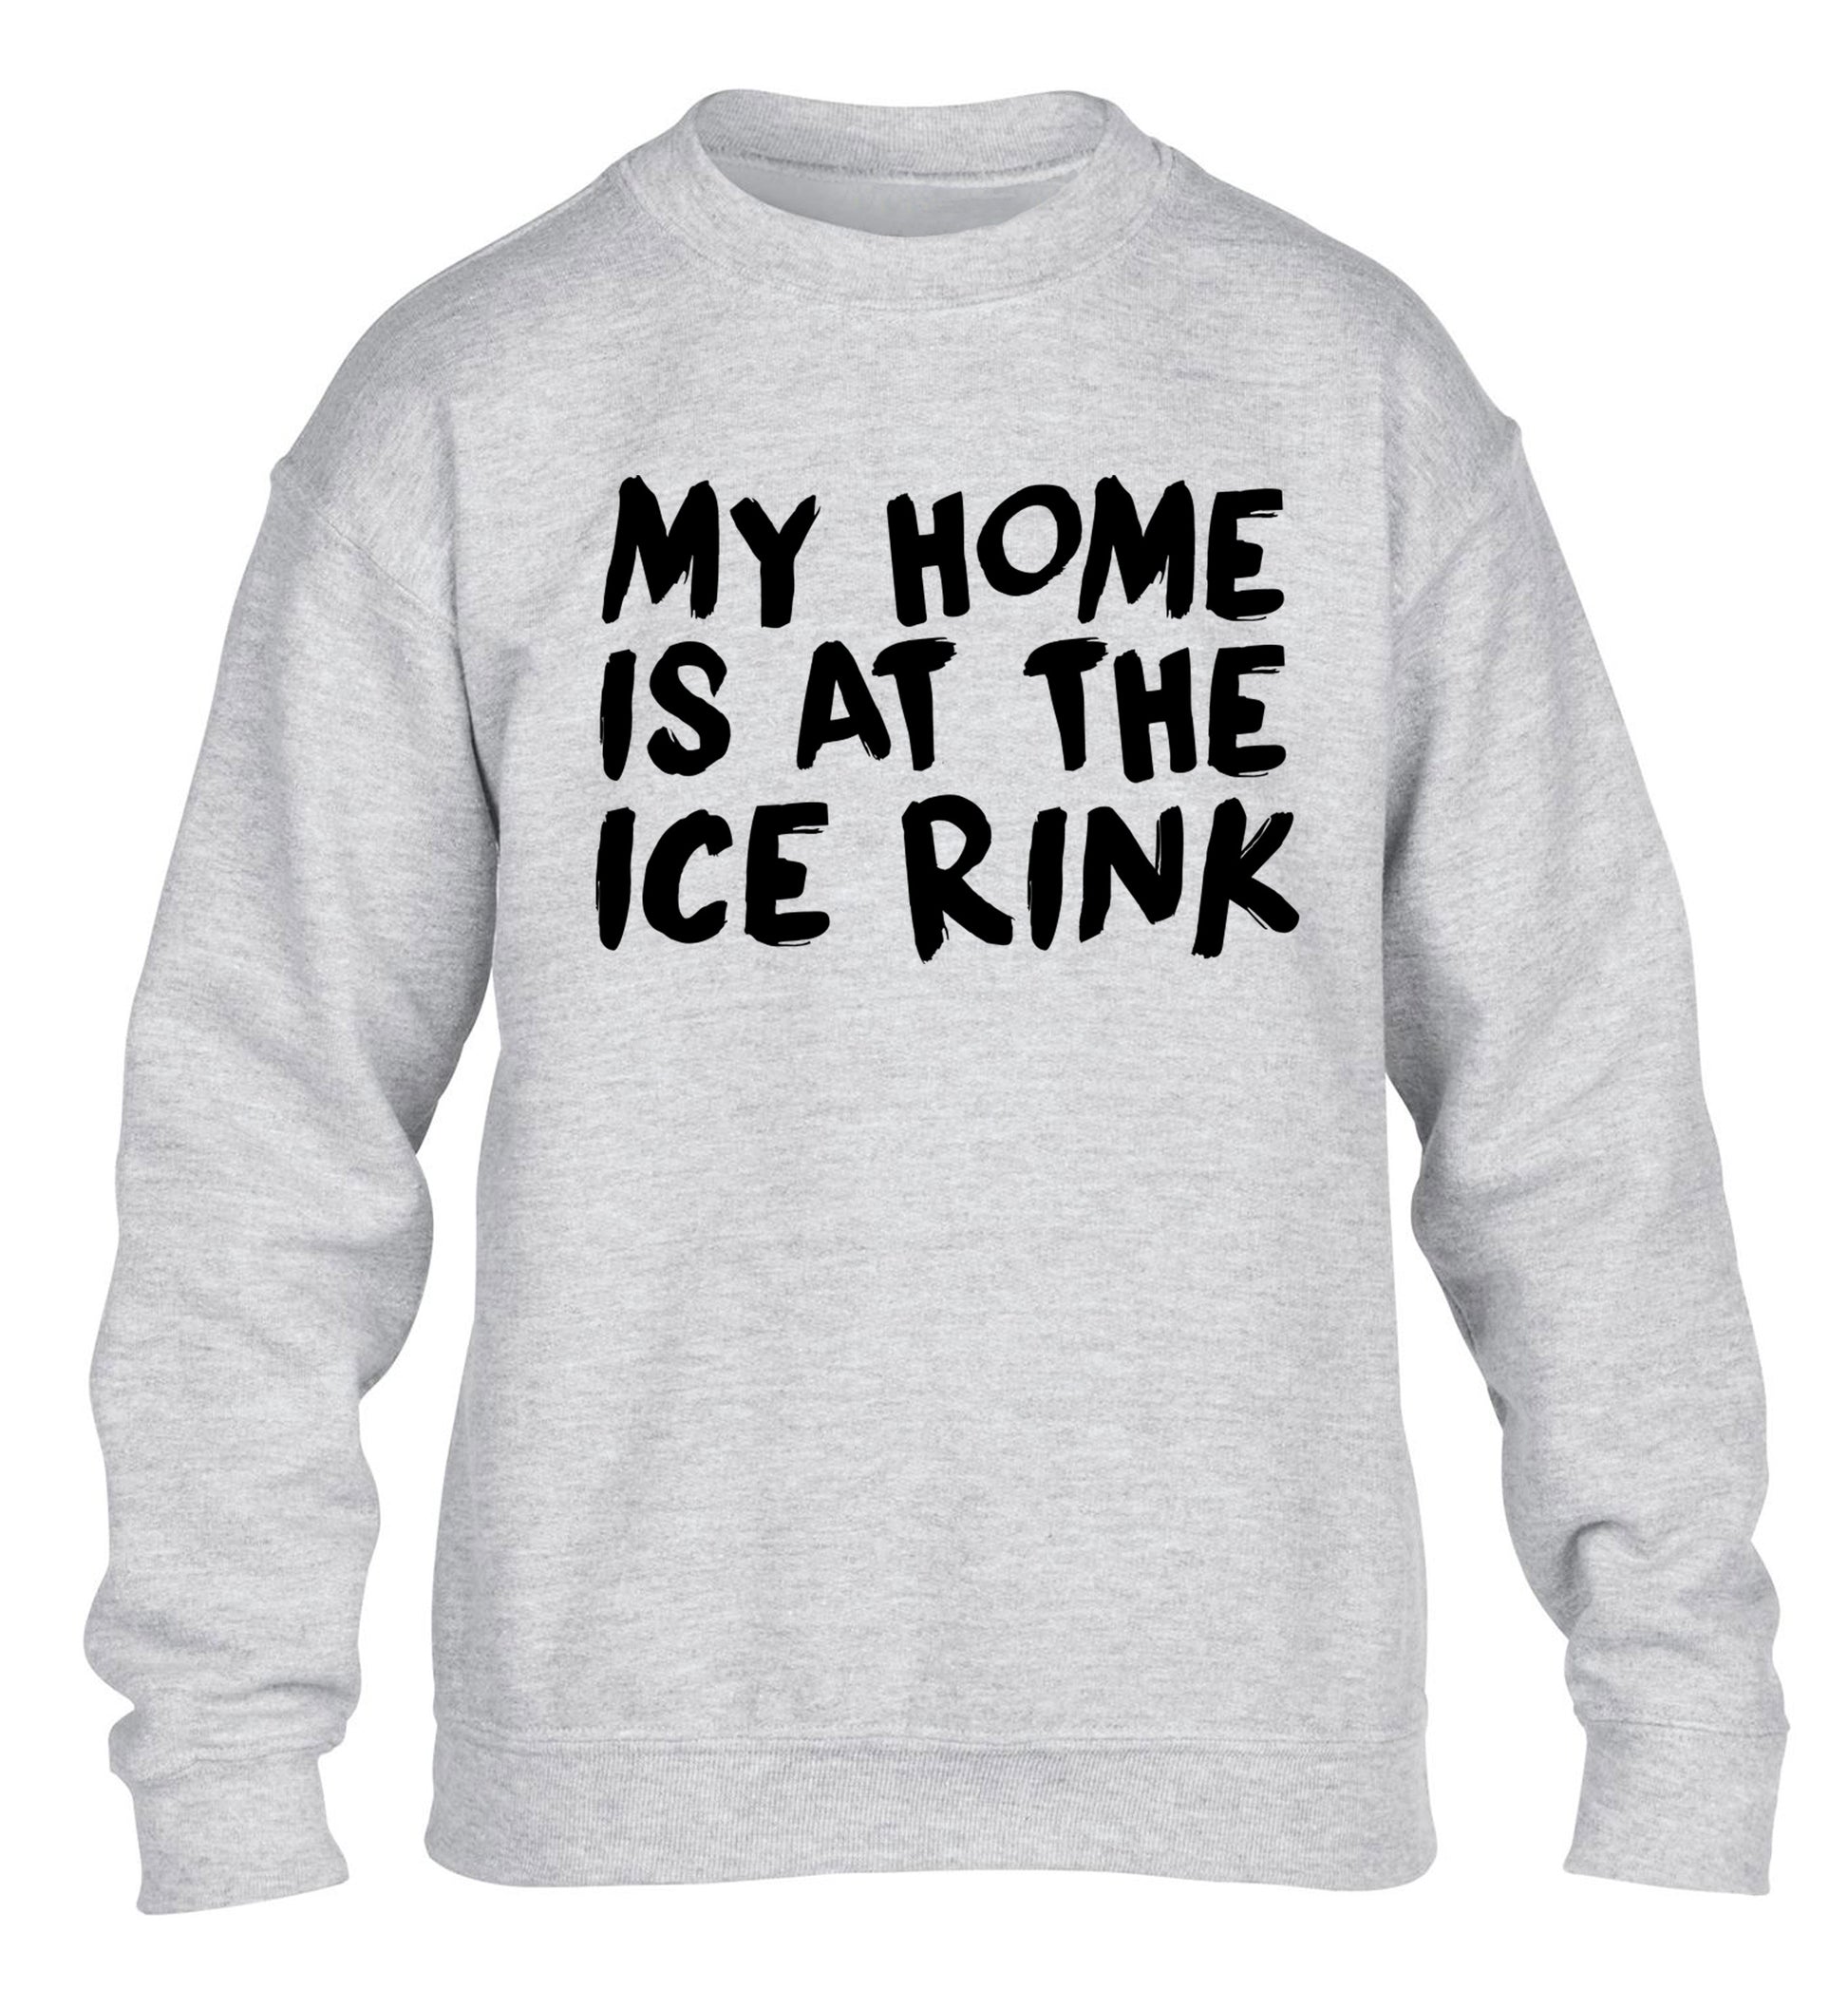 My home is at the ice rink children's grey sweater 12-14 Years